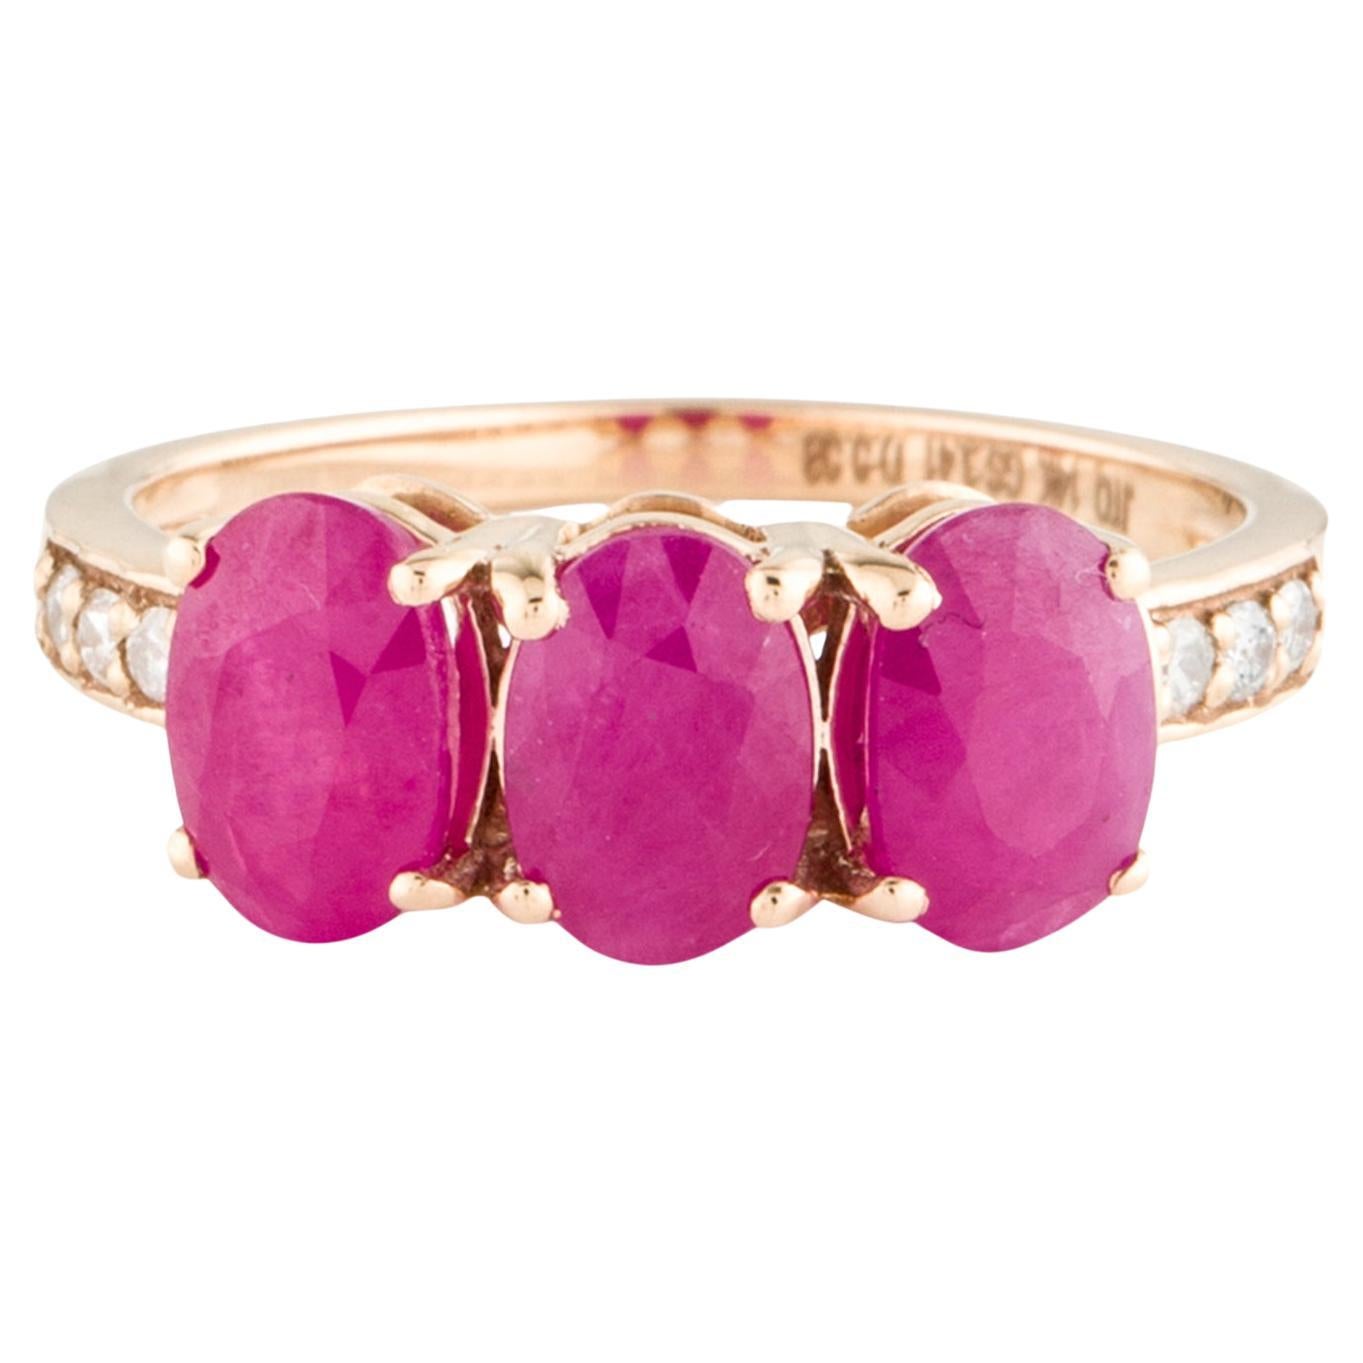 Luxurious 14K Ruby & Diamond Cocktail Band Ring - Size 6.75 - Statement Jewelry For Sale